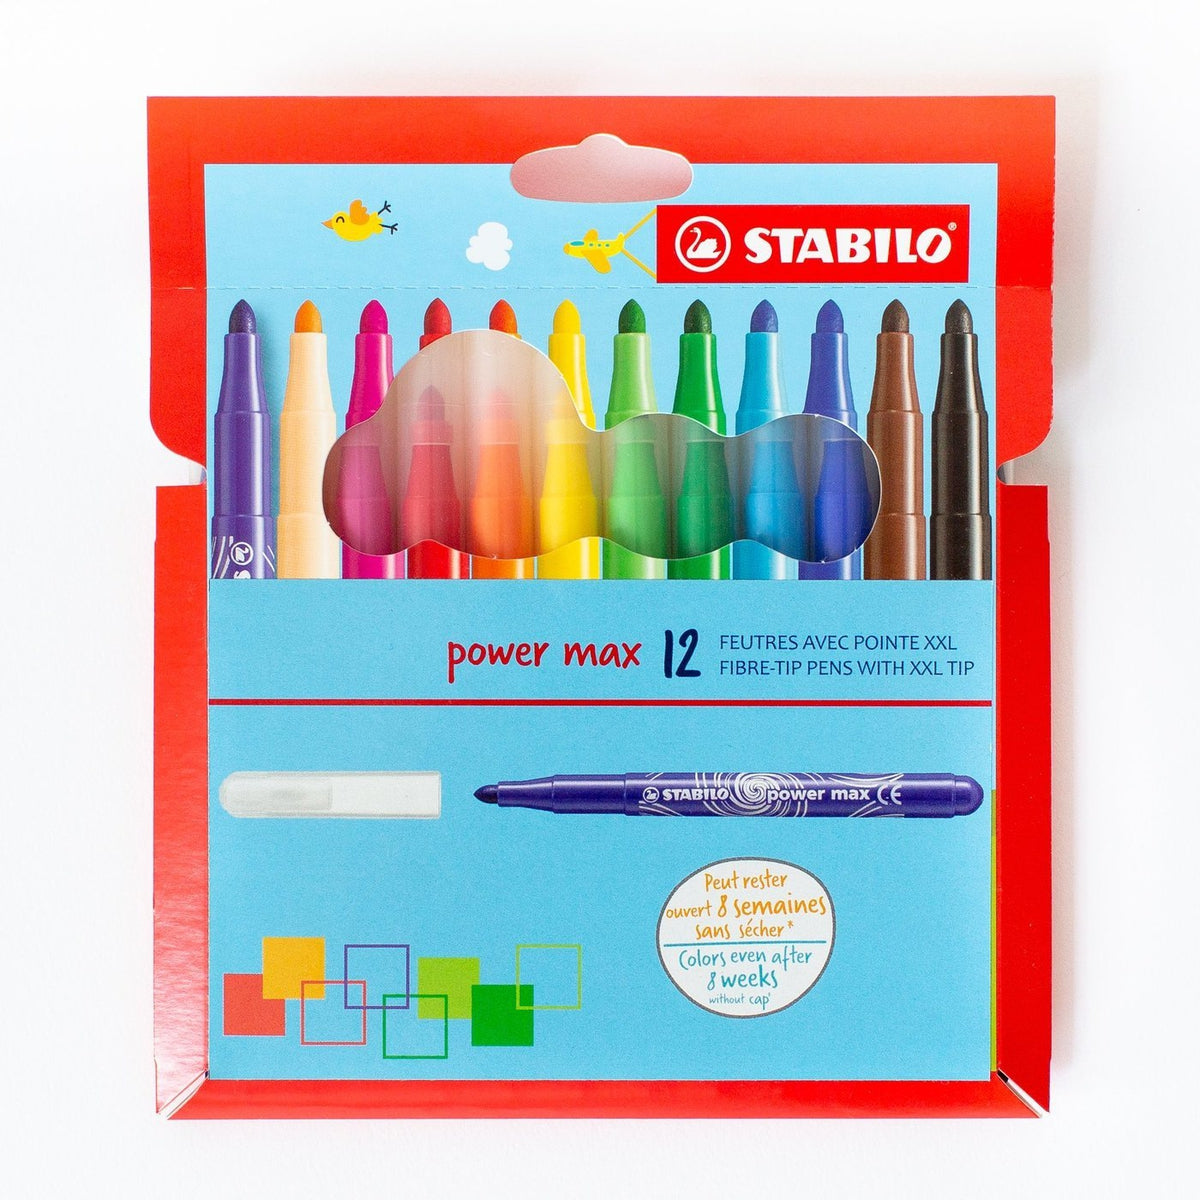 Stabilo Woody 3 in 1 Crayon Pencils – Dilly Dally Kids